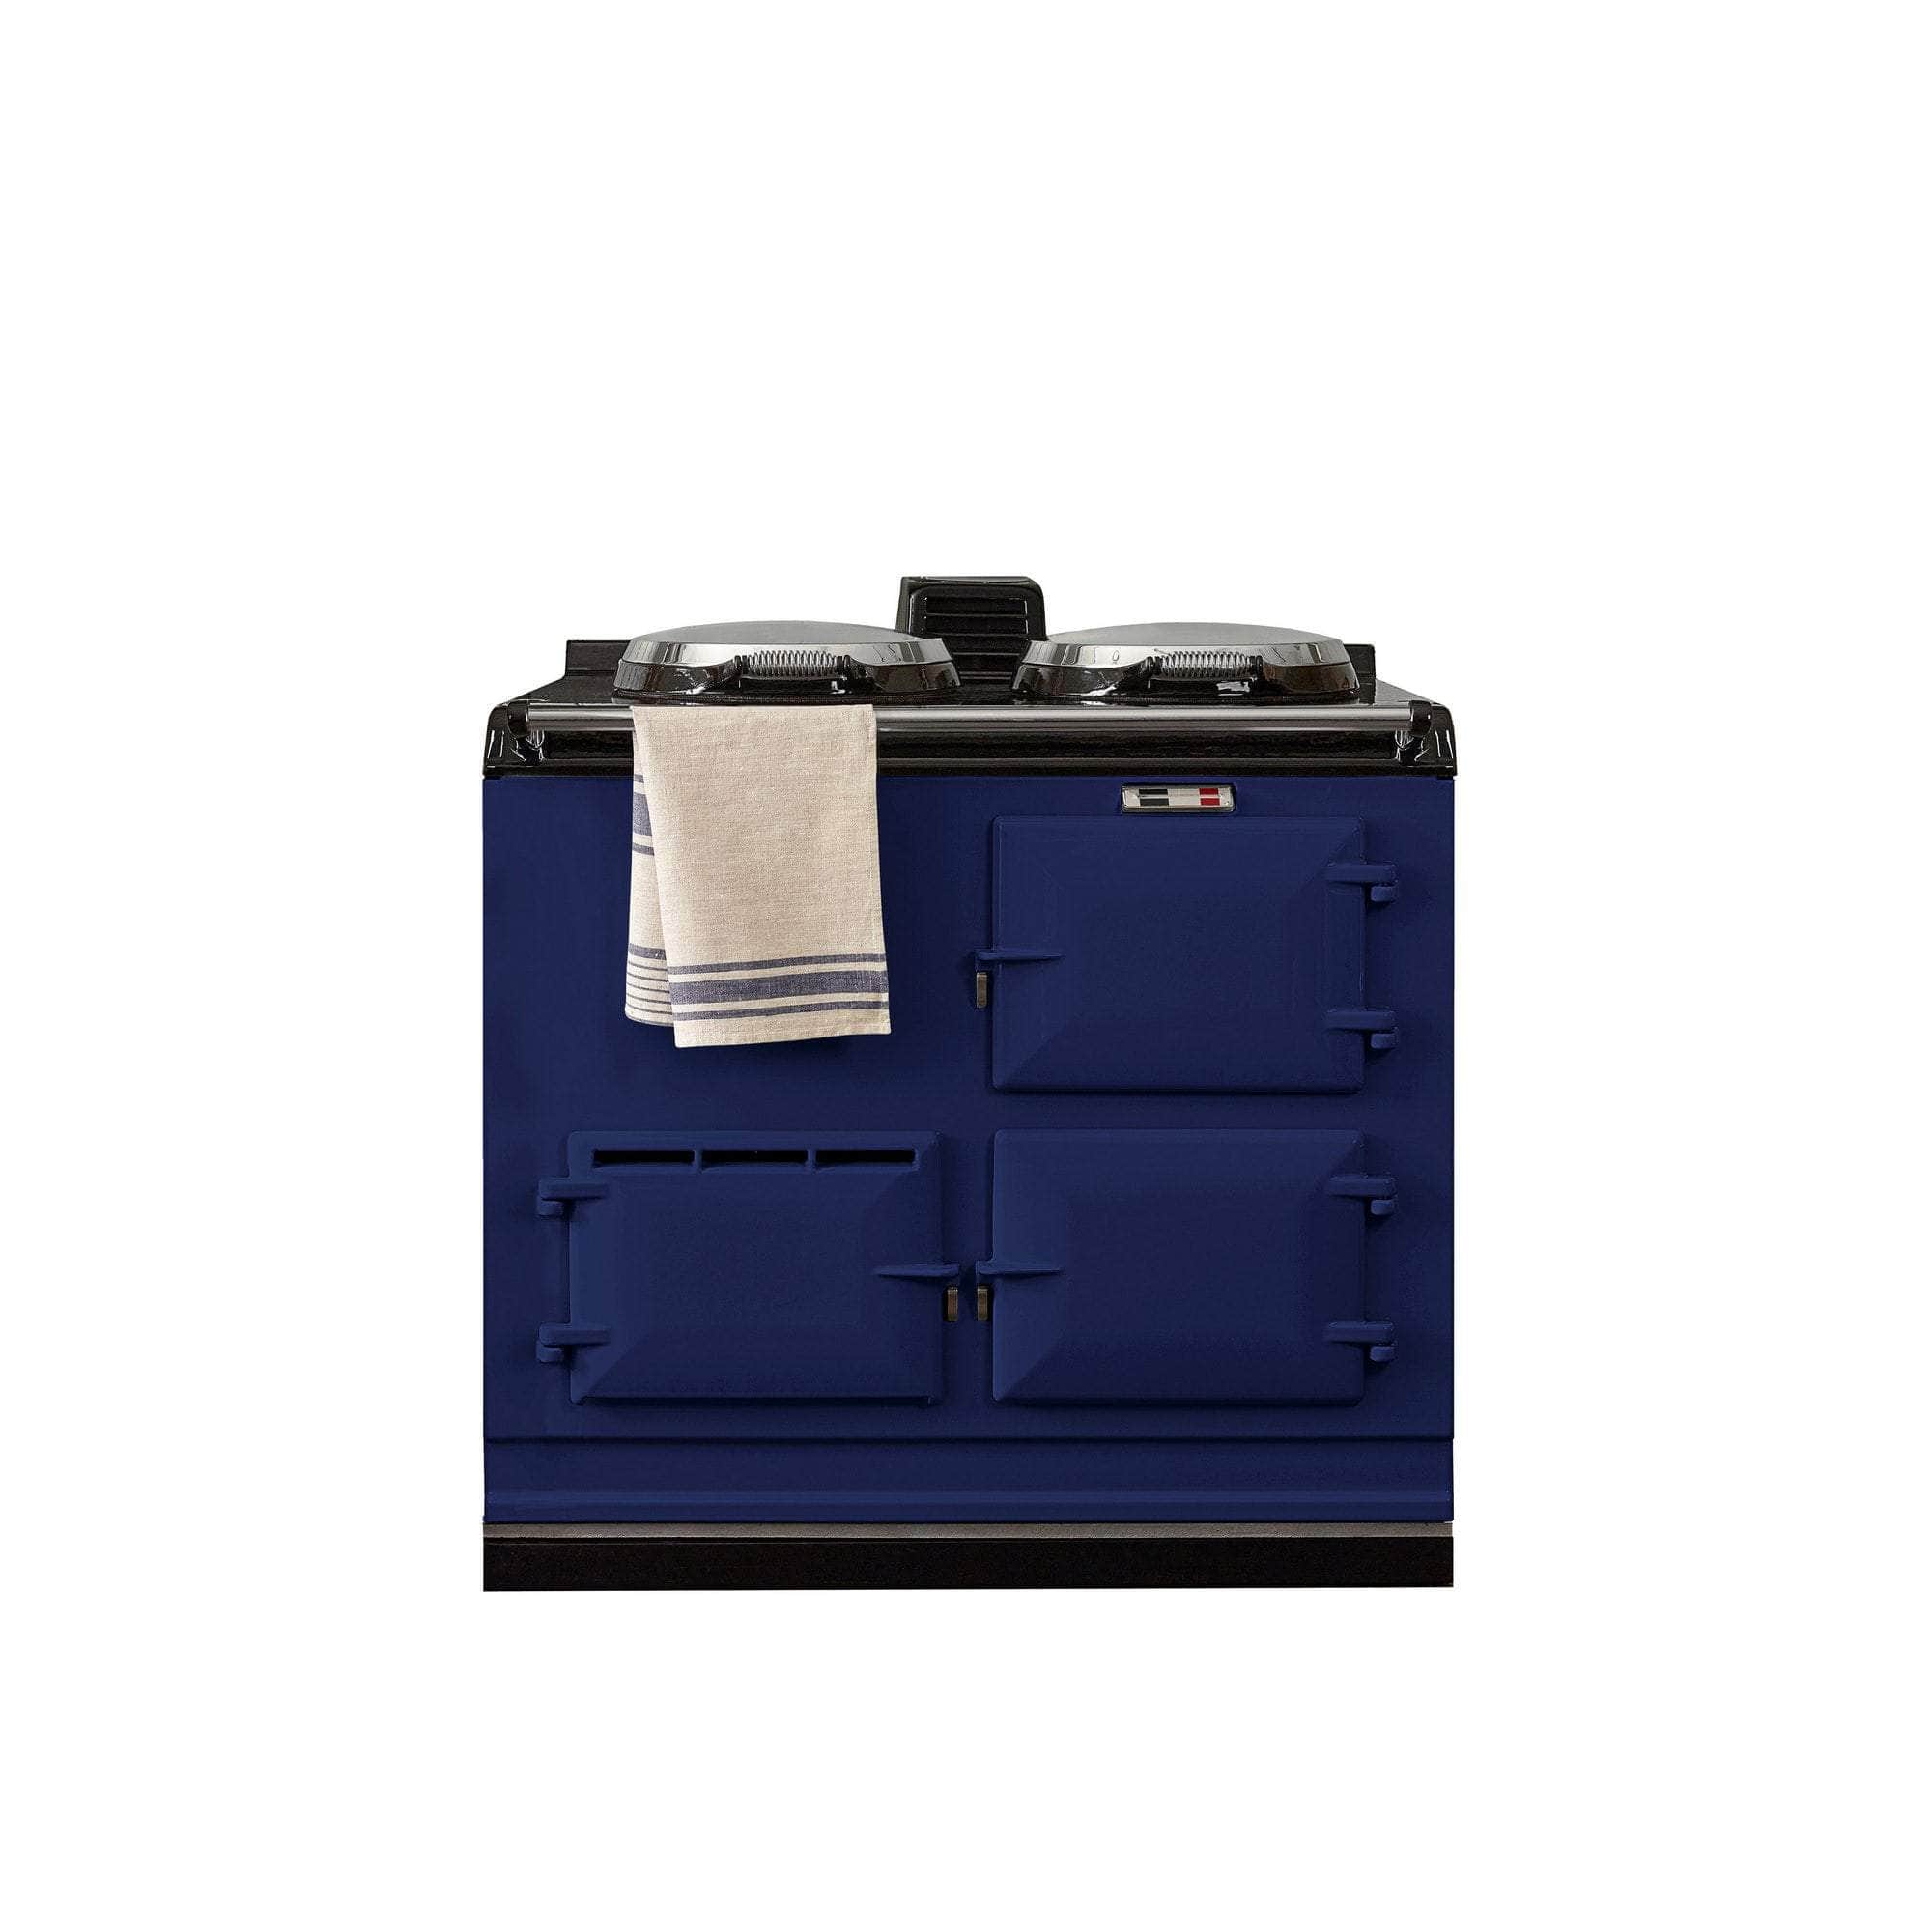 2 Oven Modern Style Remanufactured Aga cooker by Blake & Bull® | Electric | Oxford Blue